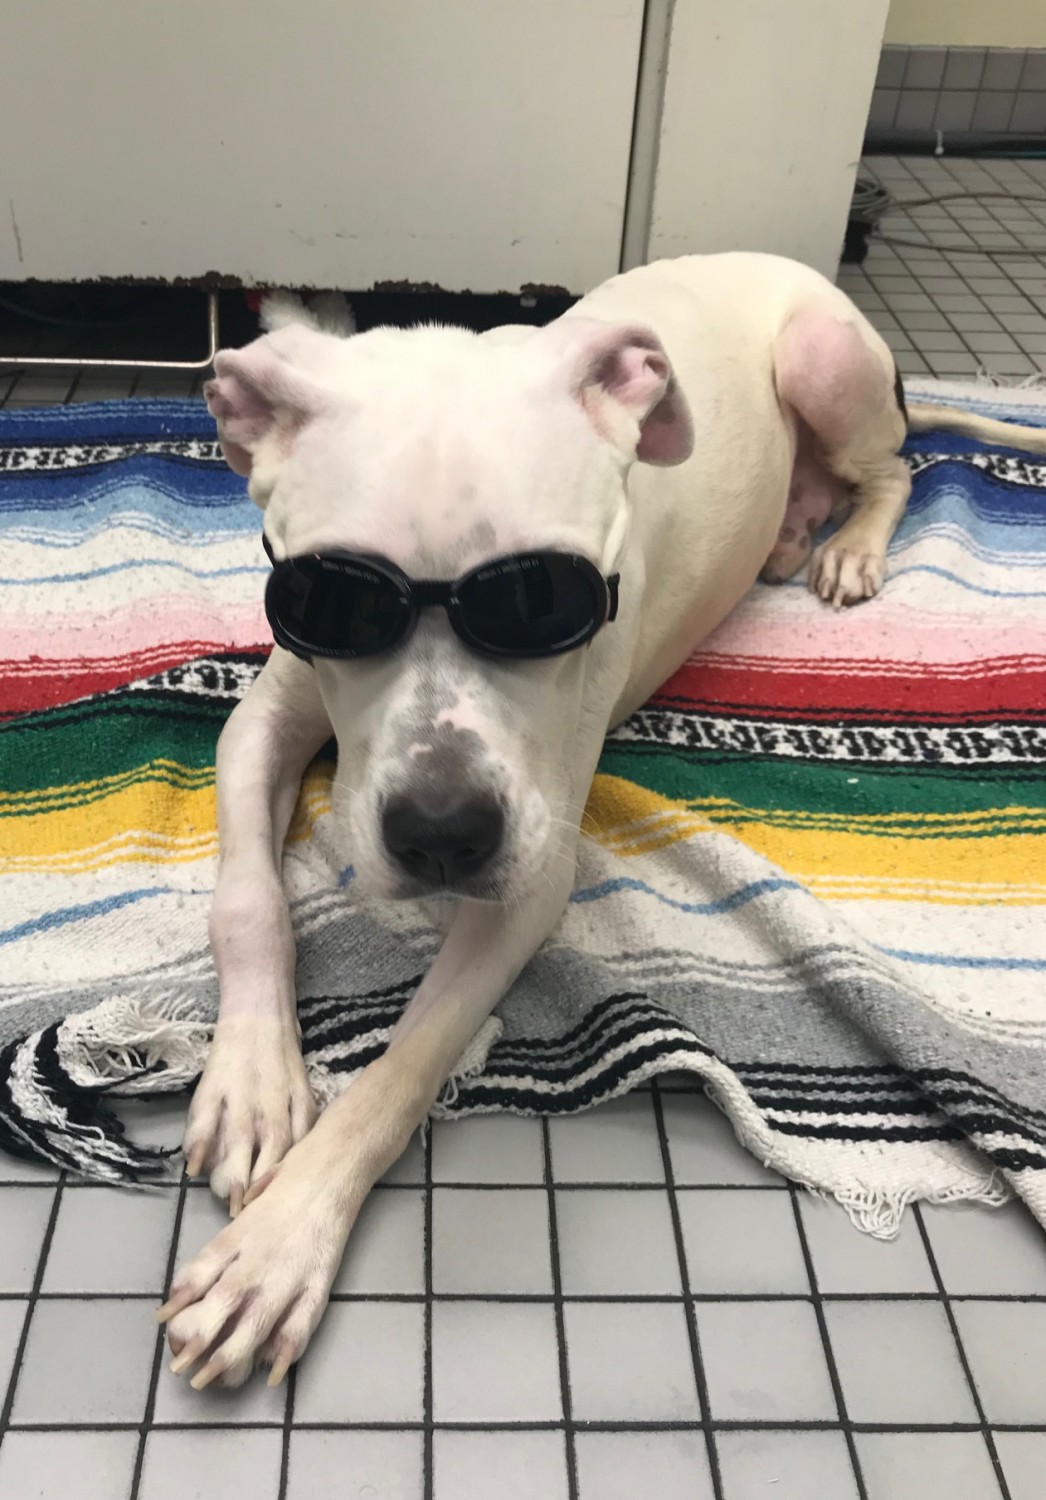 Dog wearing protective goggles